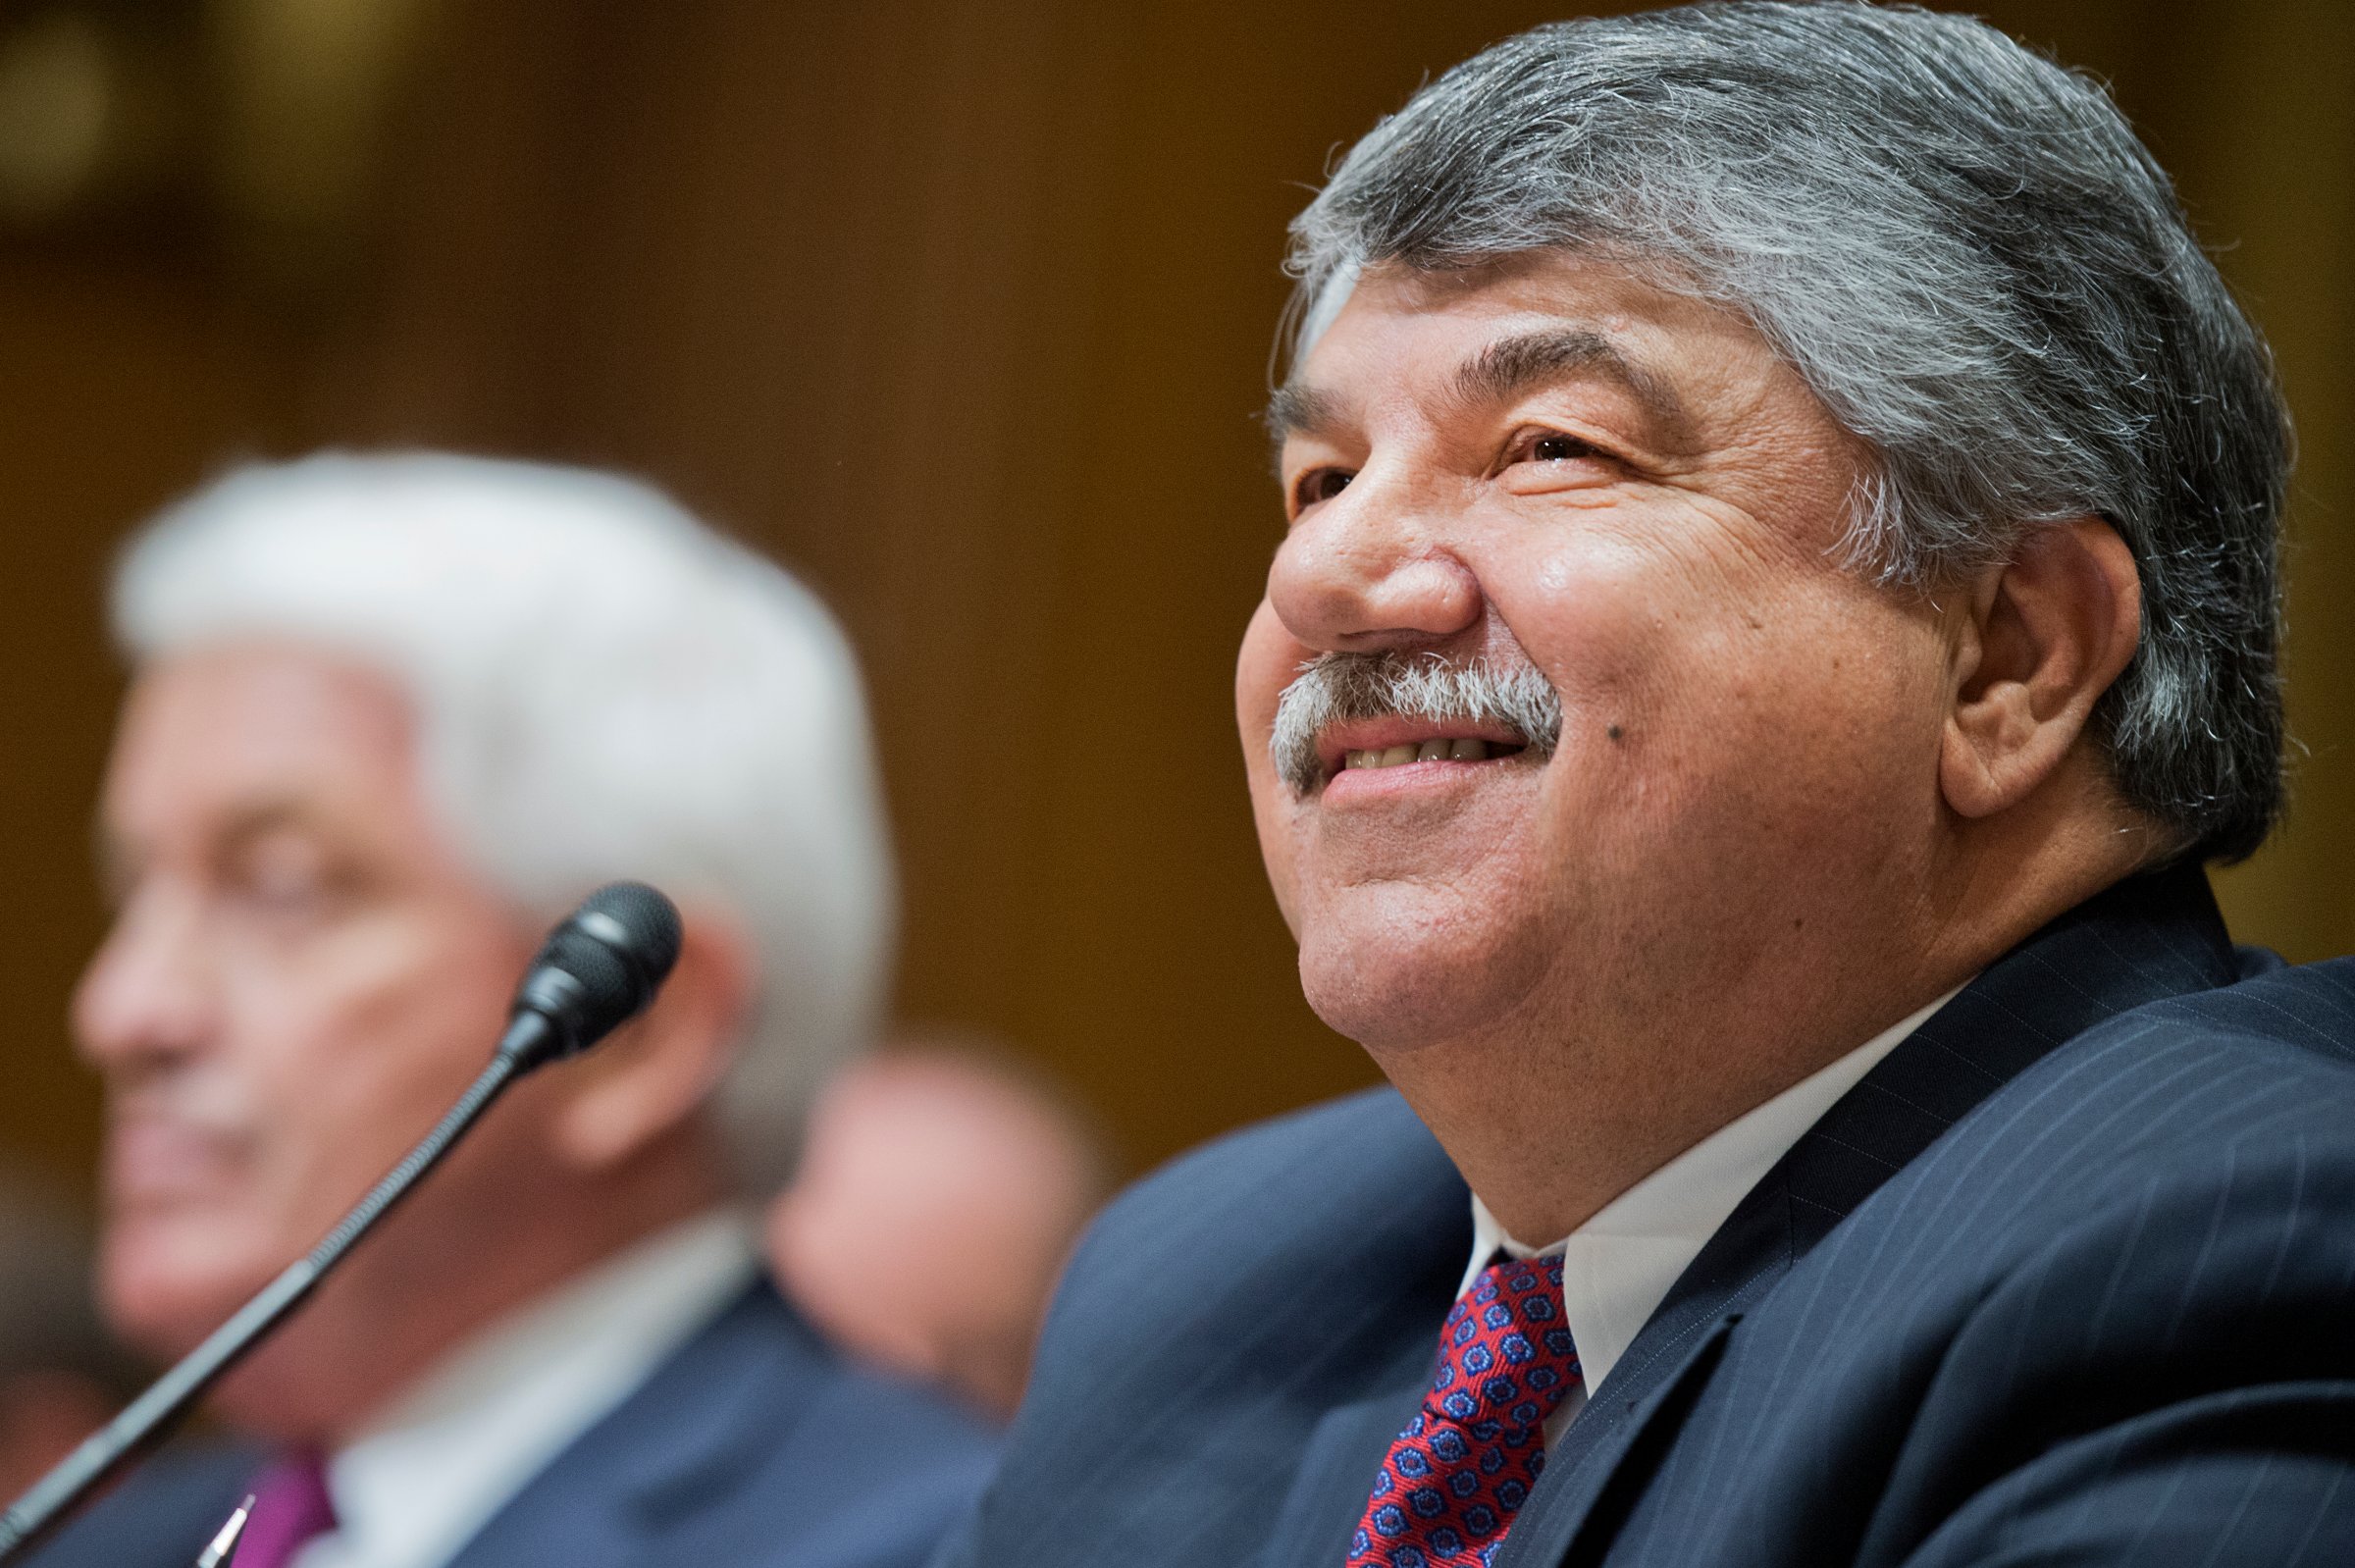 Richard Trumka, right, president of the AFL-CIO prepare to testify before a Senate Finance Committee hearing on April 21, 2015.